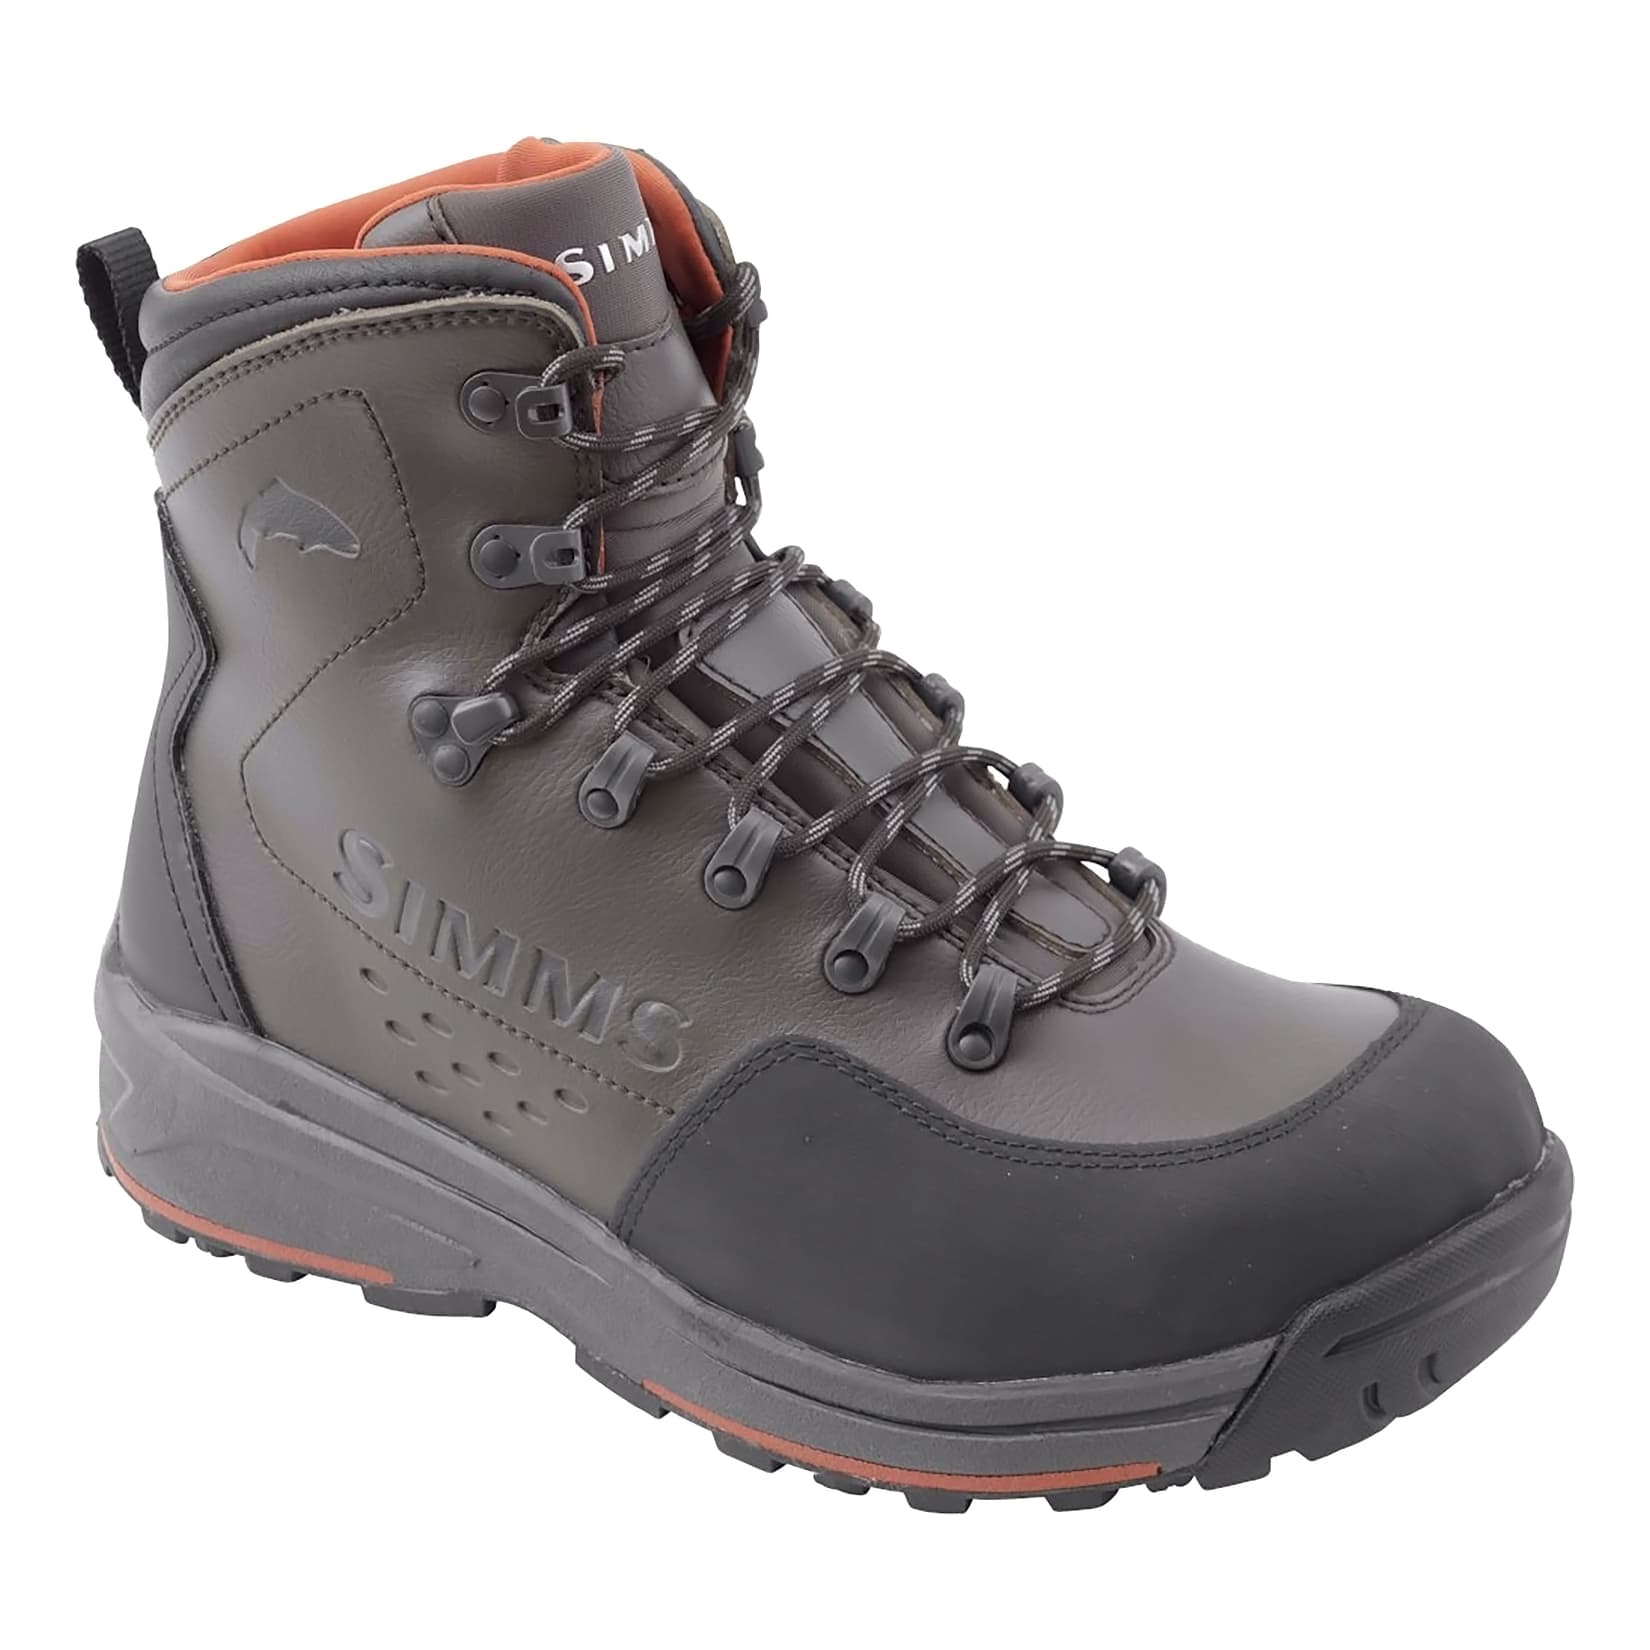 Simms Women's Freestone Wading Boot Rubber Sole